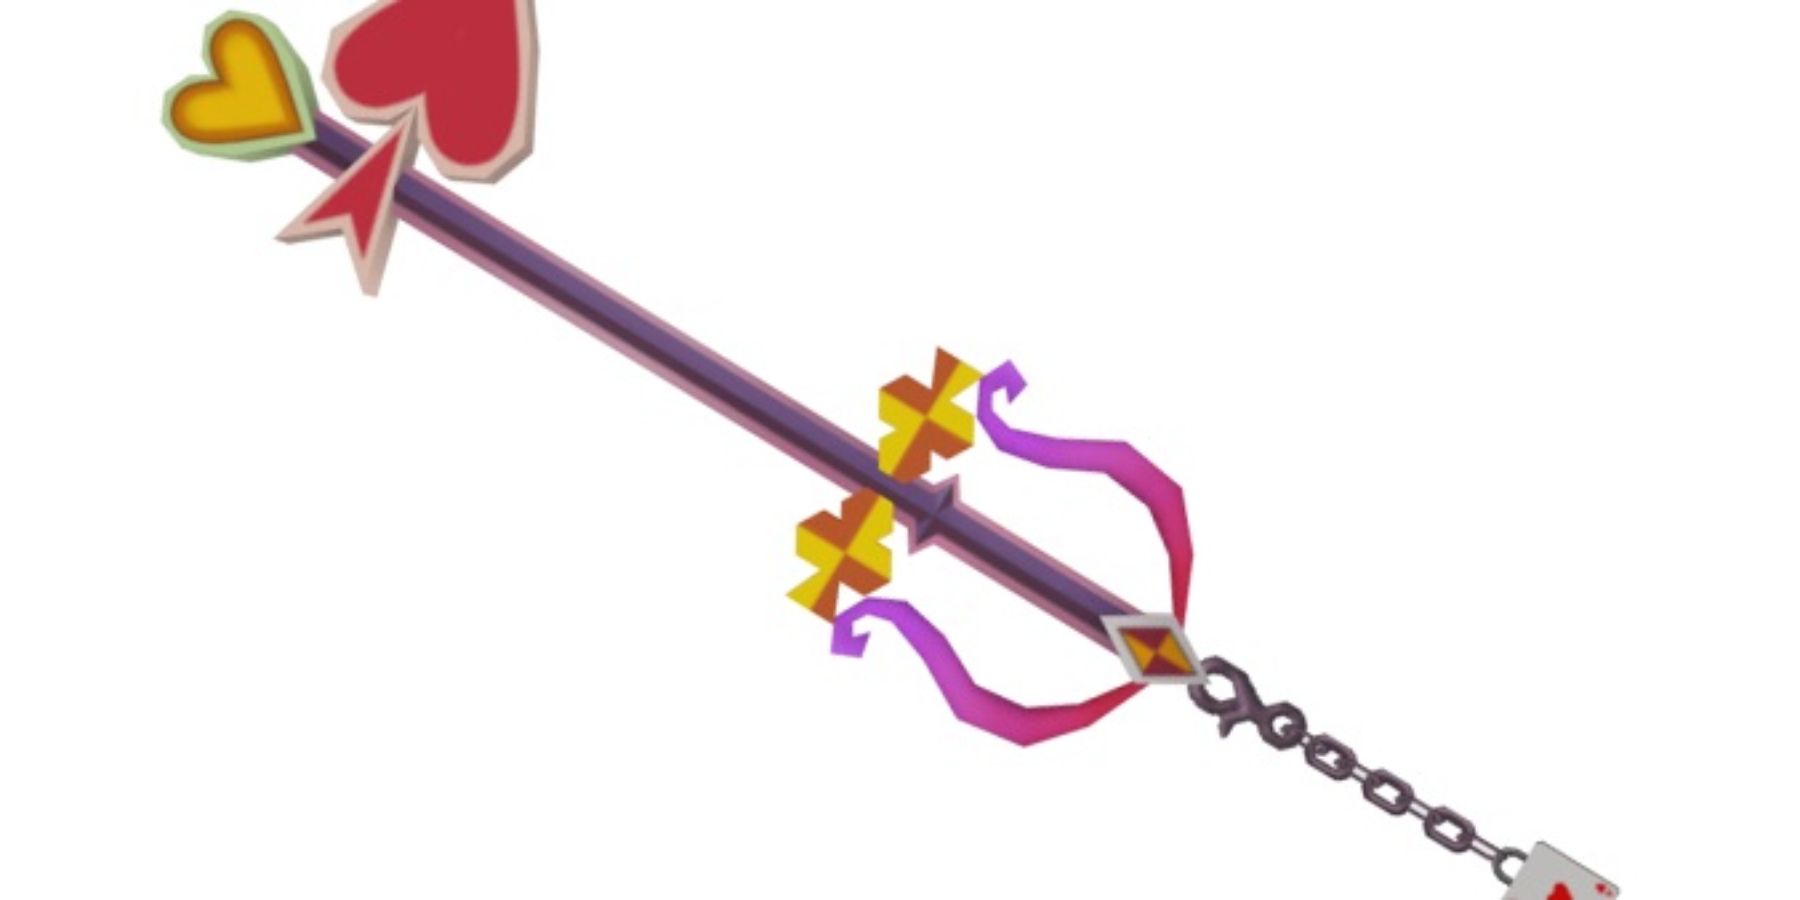 The Lady Luck Keyblade in Kingdom Hearts